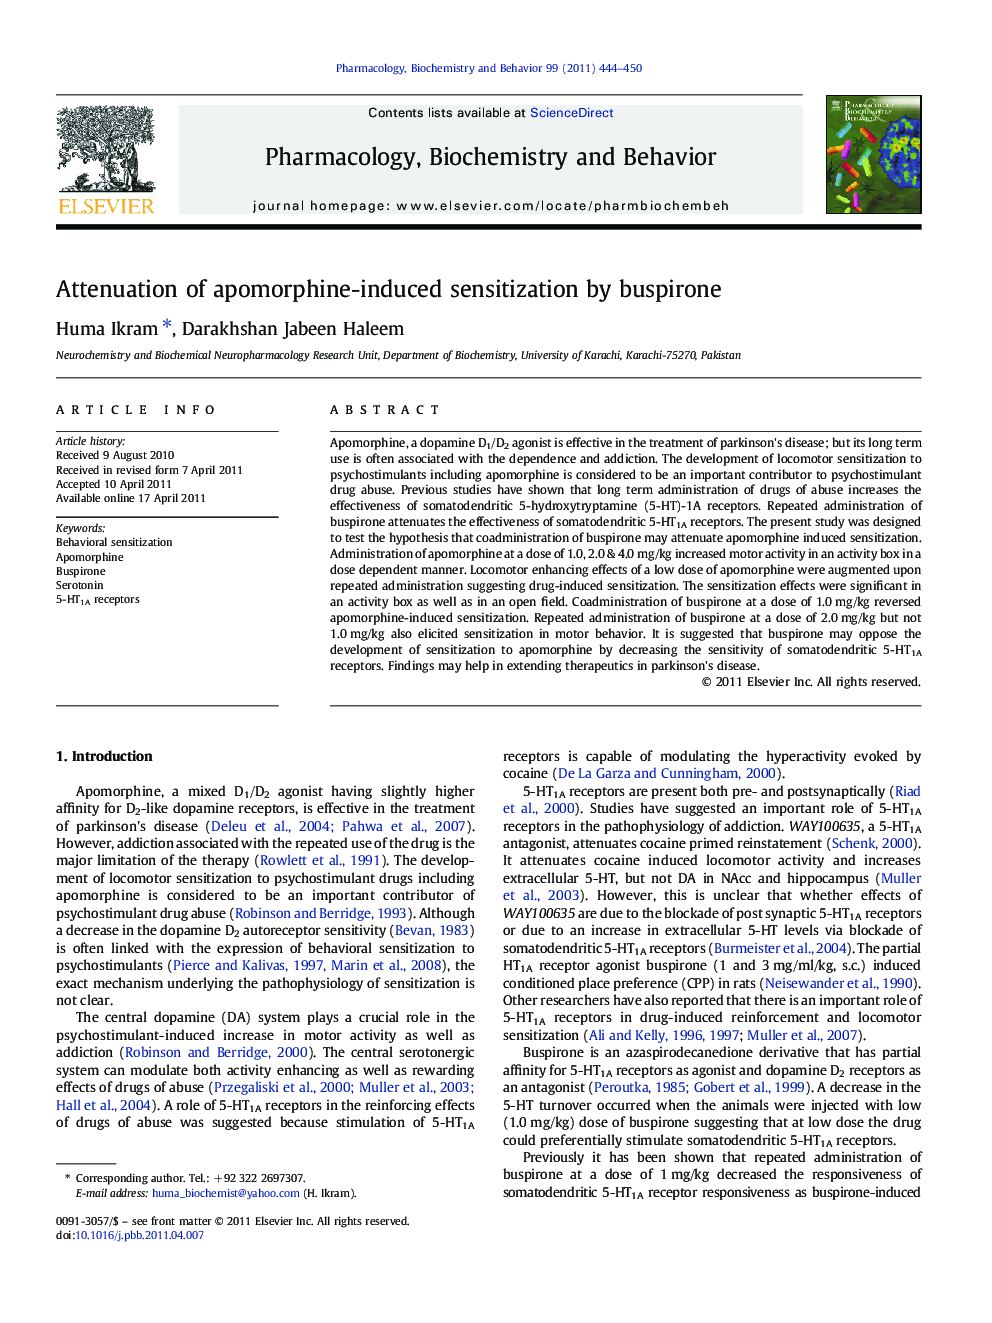 Attenuation of apomorphine-induced sensitization by buspirone